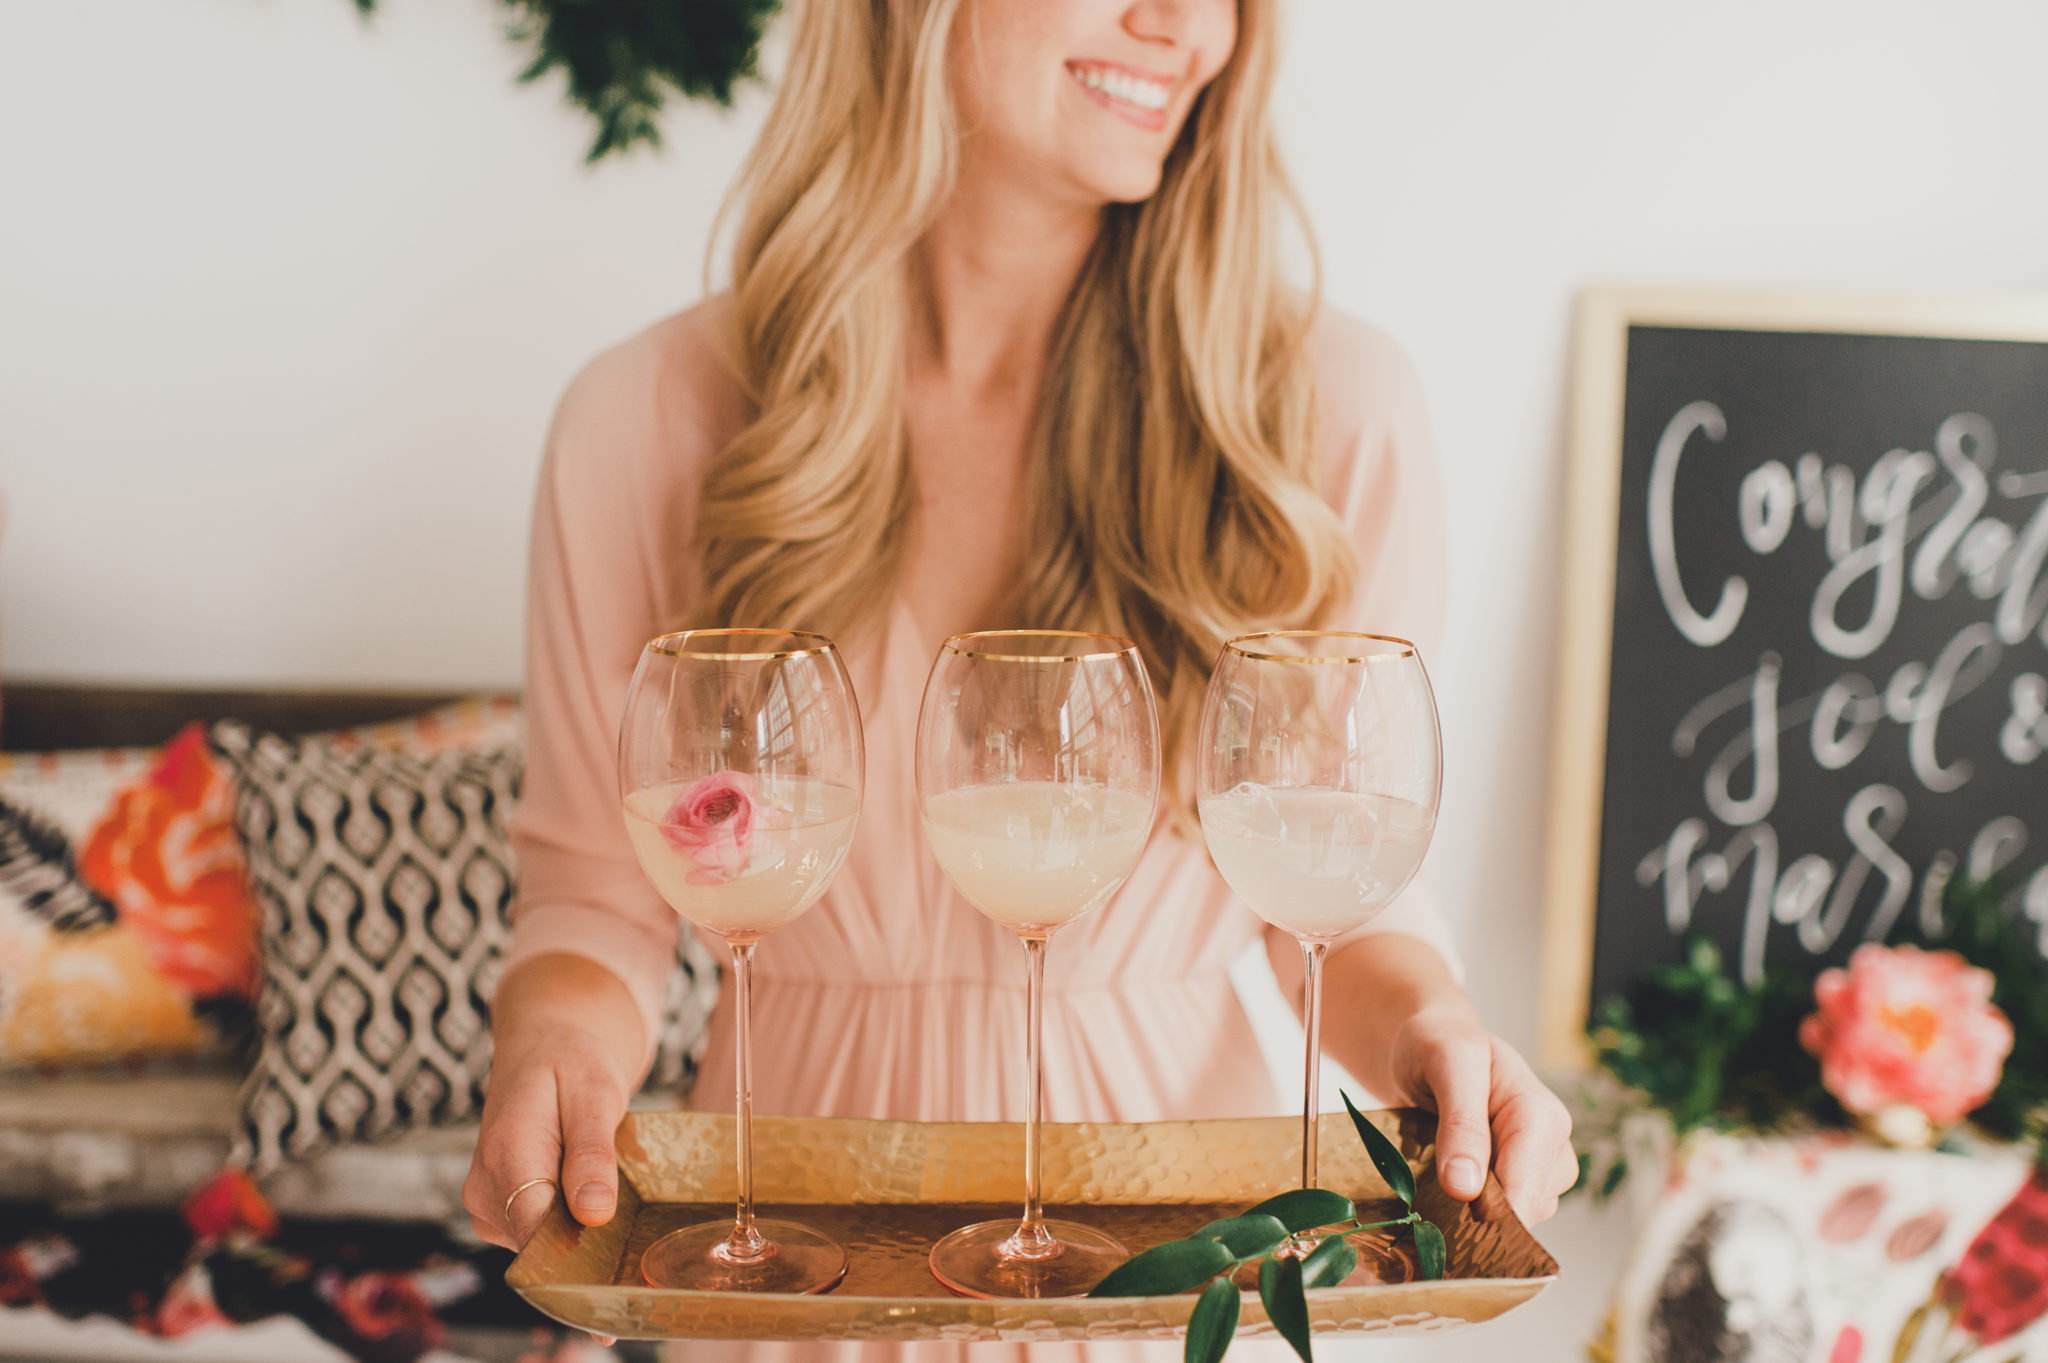 Blonde Woman holding tray of rose wine glasses.